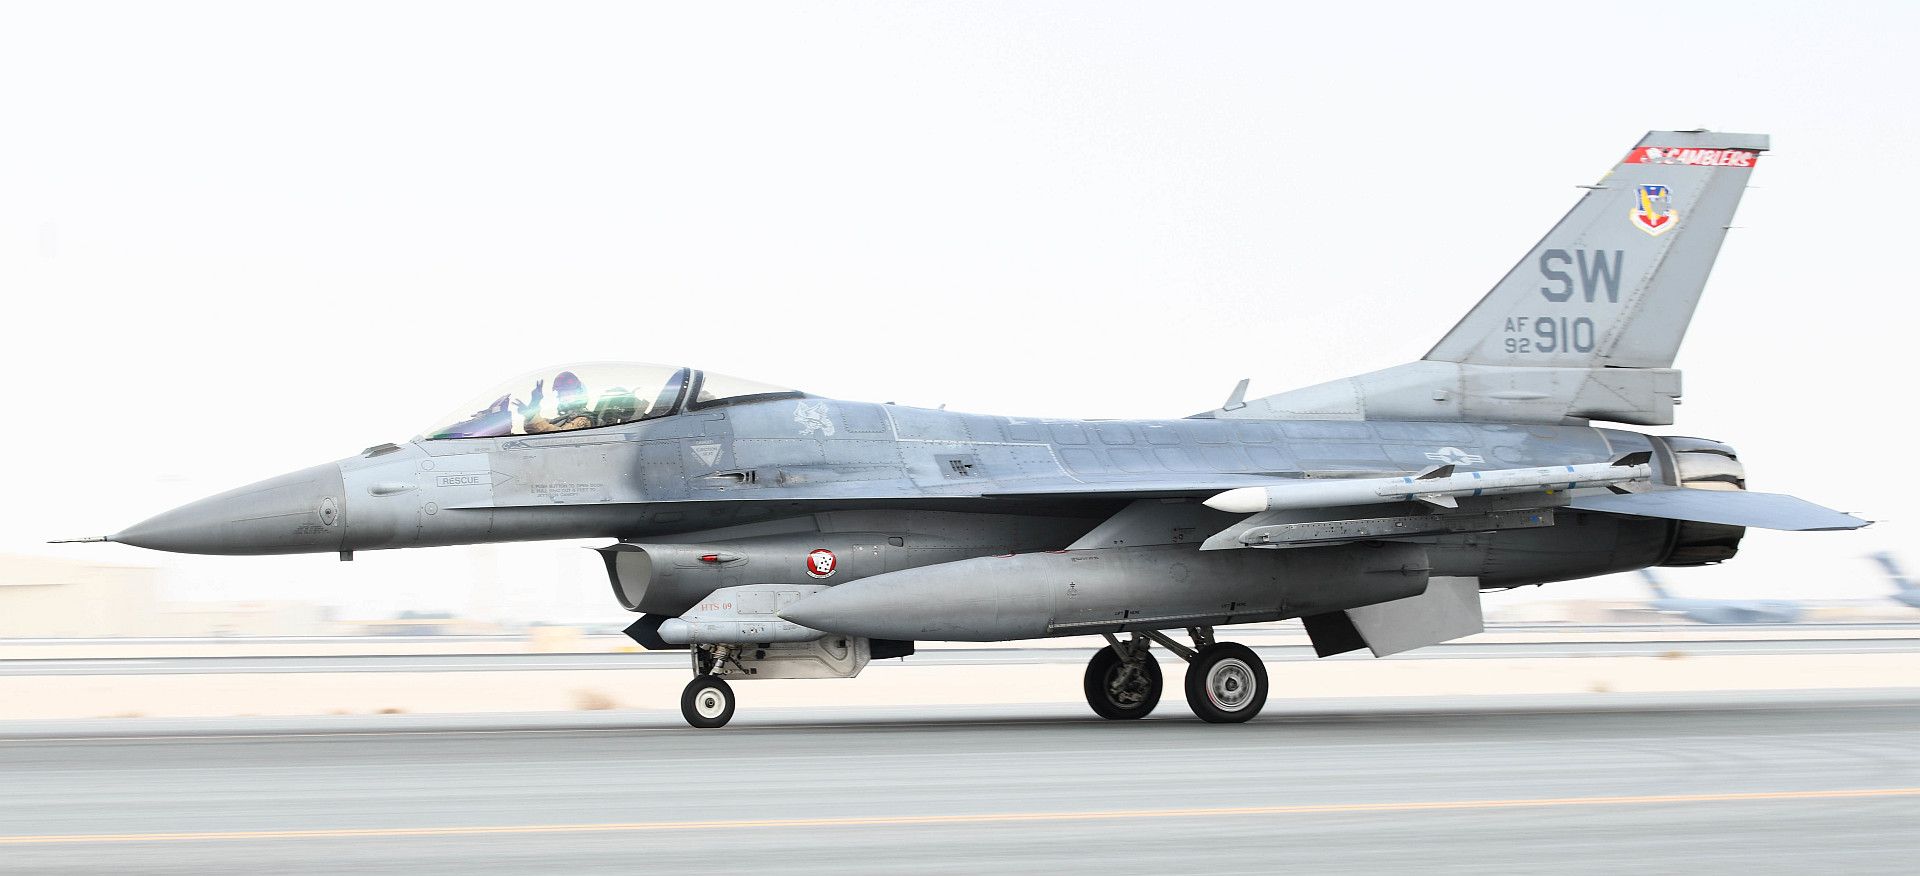 F 16 Fighting Falcon Pilot Assigned To The 77th Expeditionary Fighter Squadron Deployed To Prince Sultan Air Base Kingdom Of Saudi Arabia 